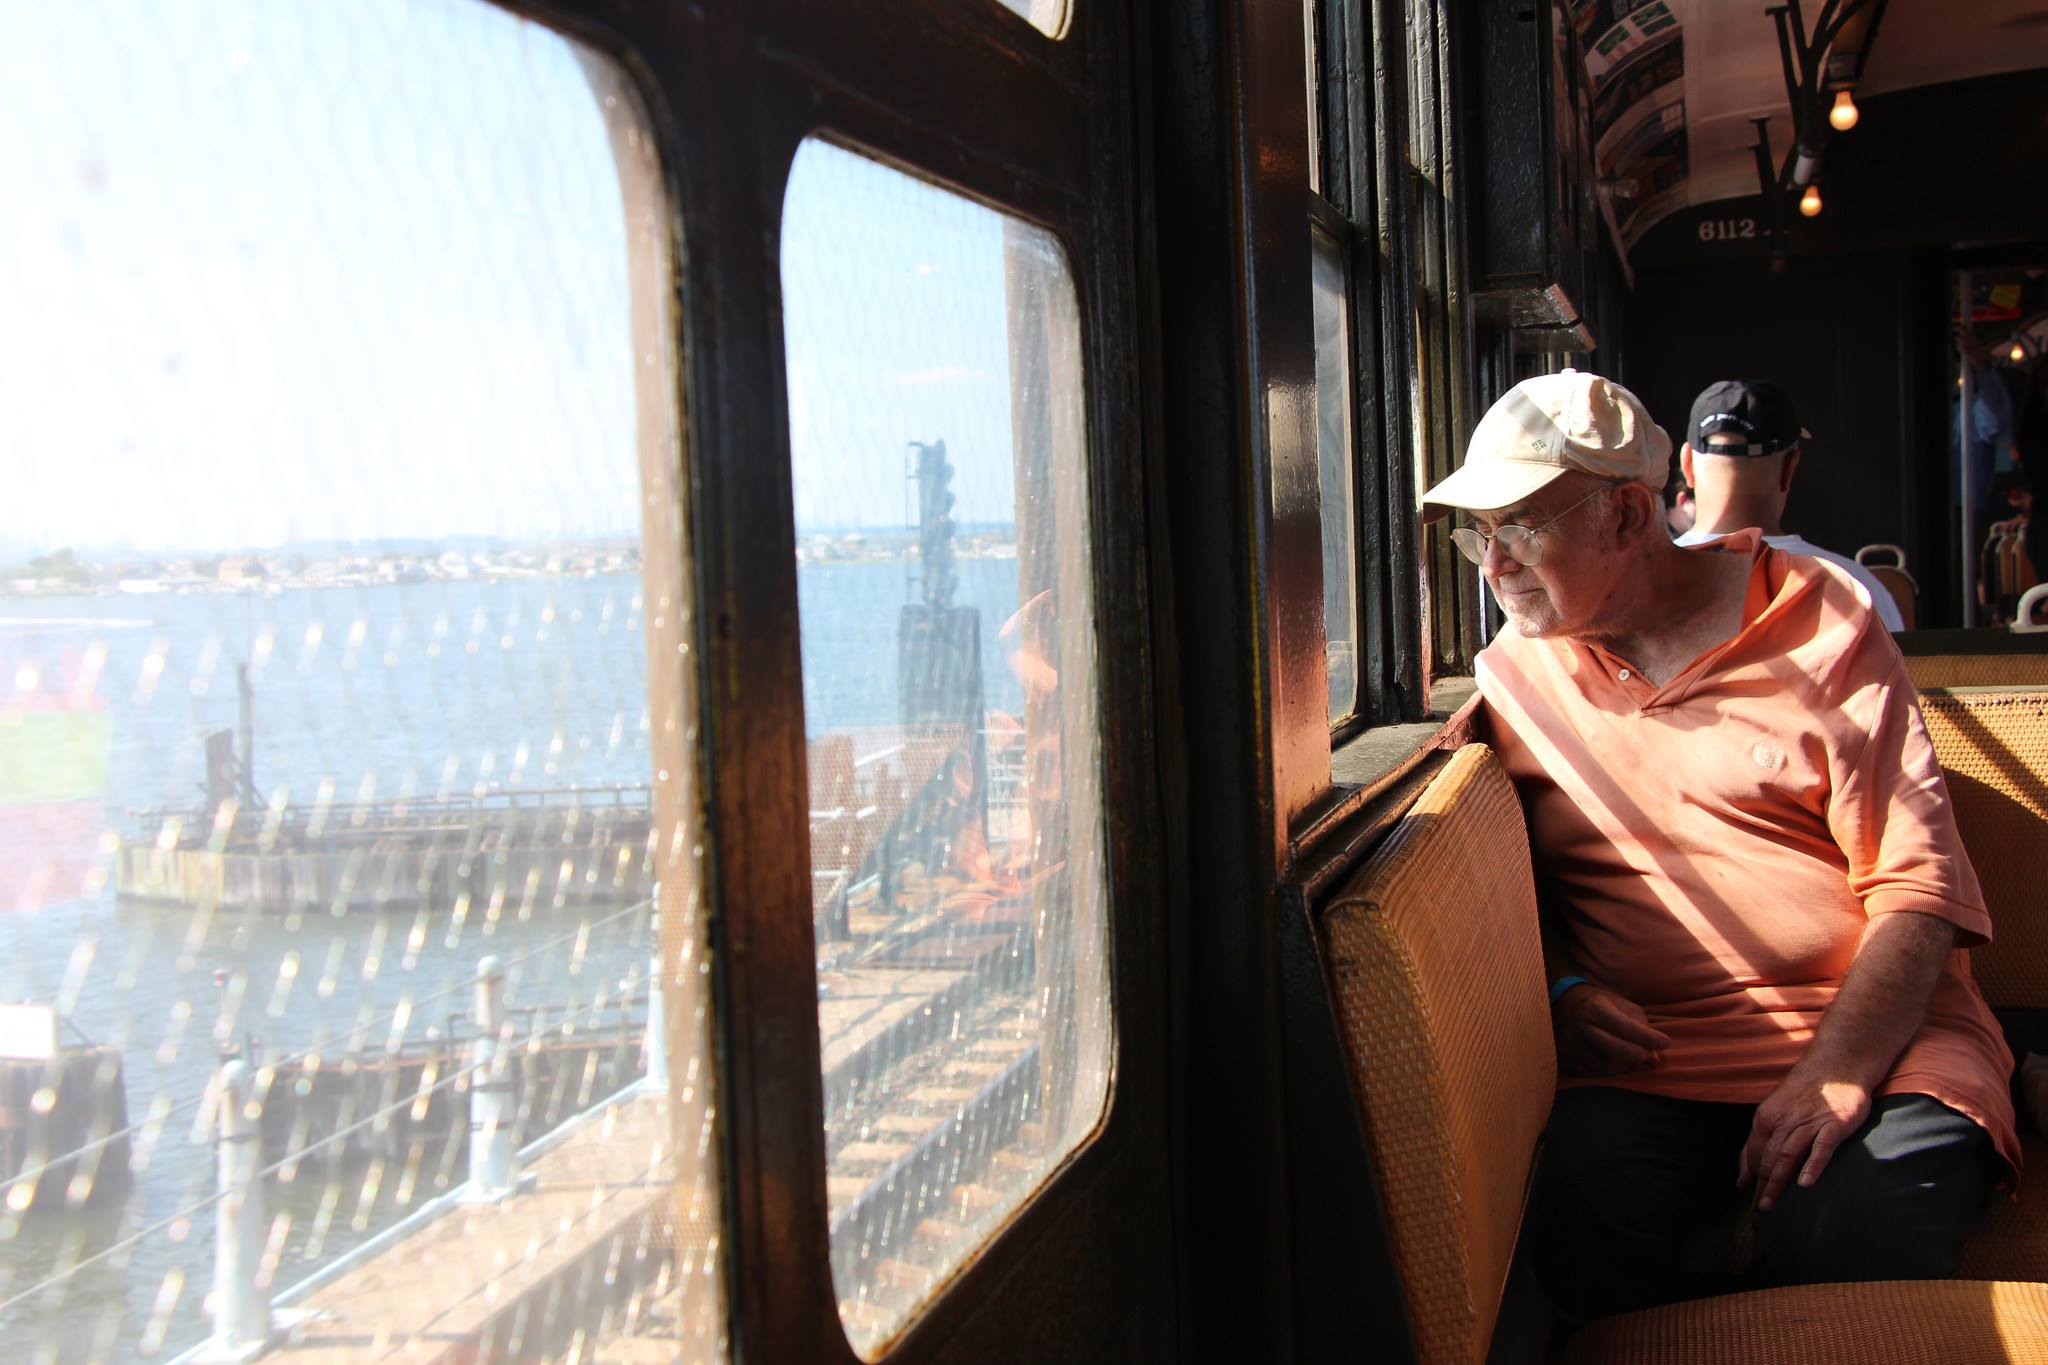 Man looking out window of vintage train car